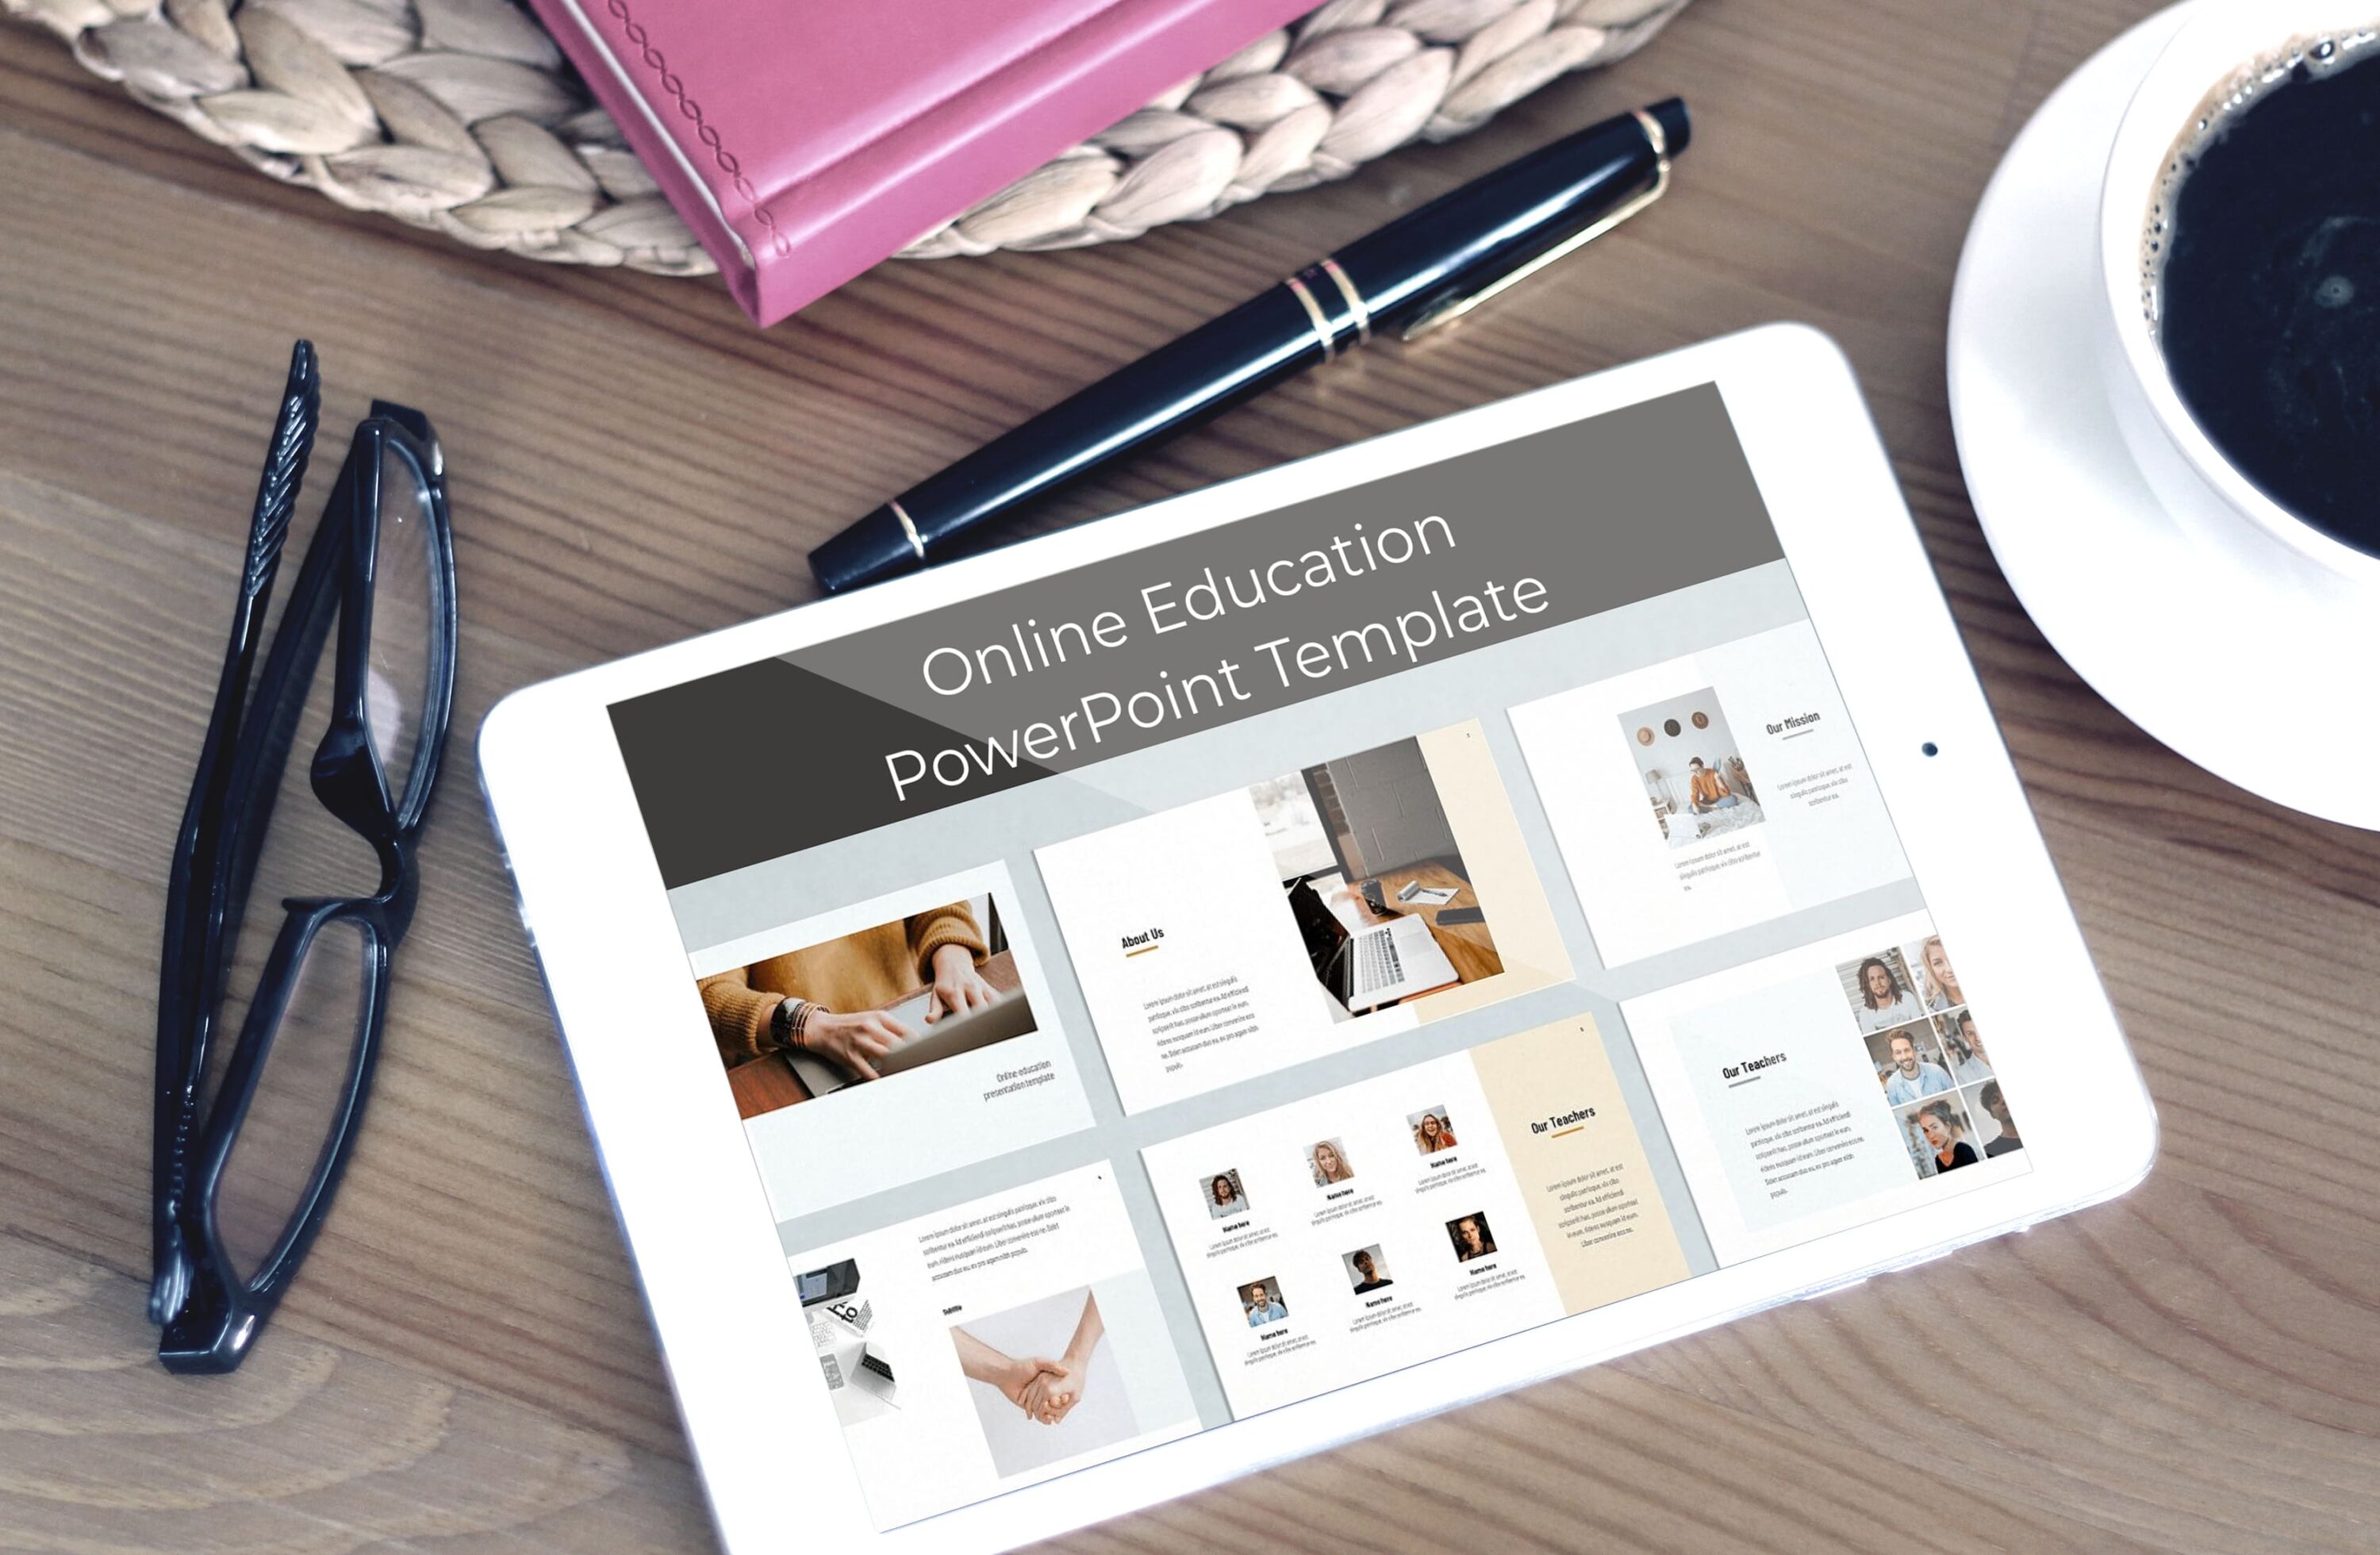 Online Education PowerPoint Template - tablet.